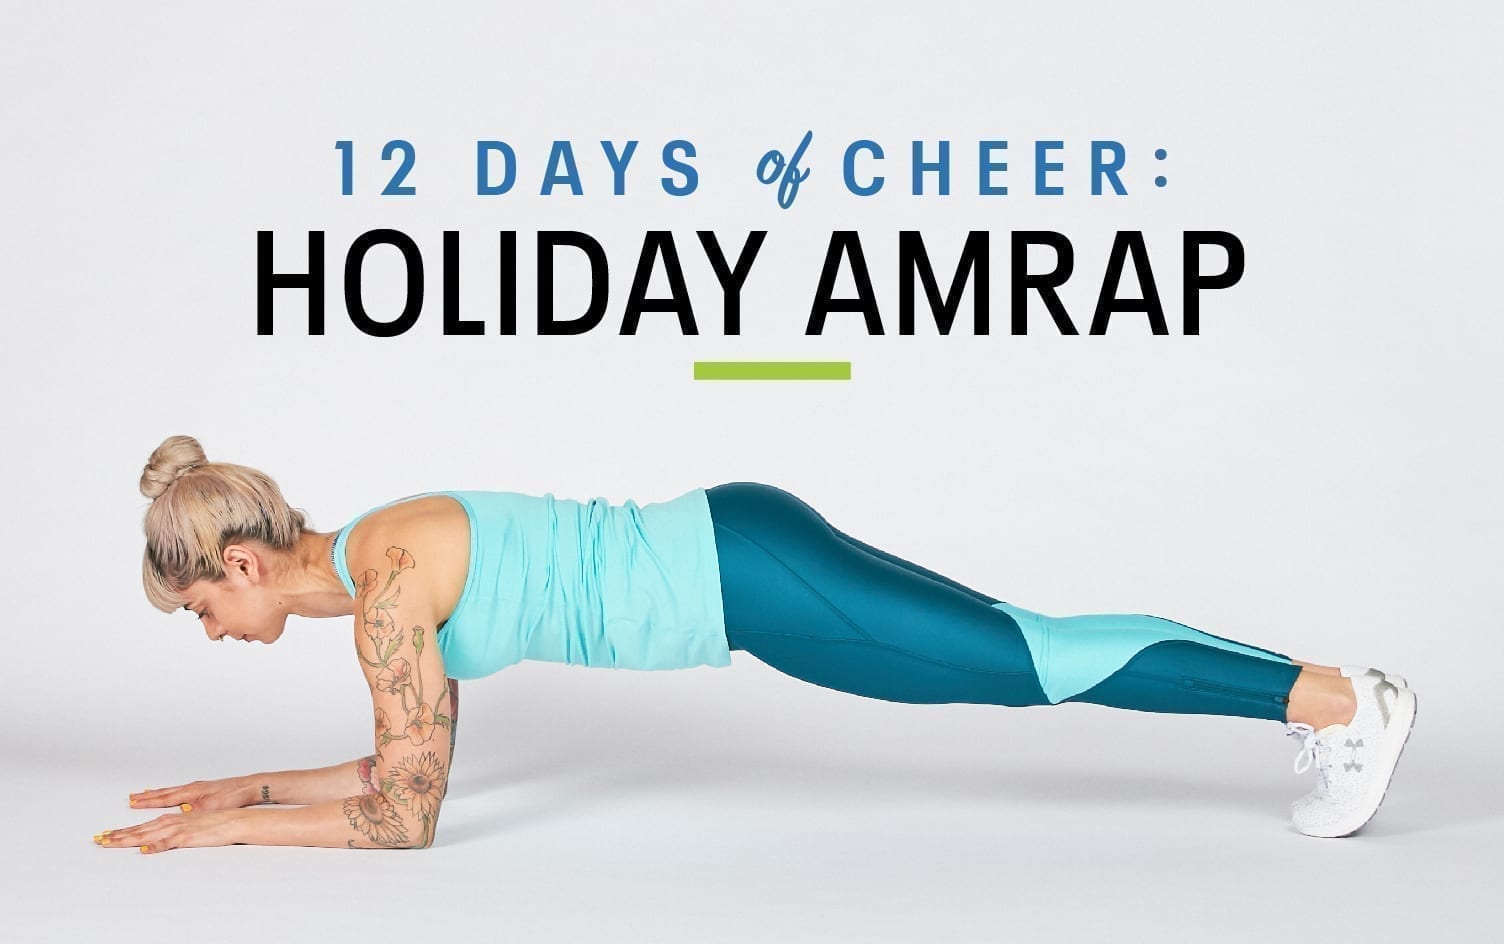 12 Days of Cheer: Holiday AMRAP, Fitness